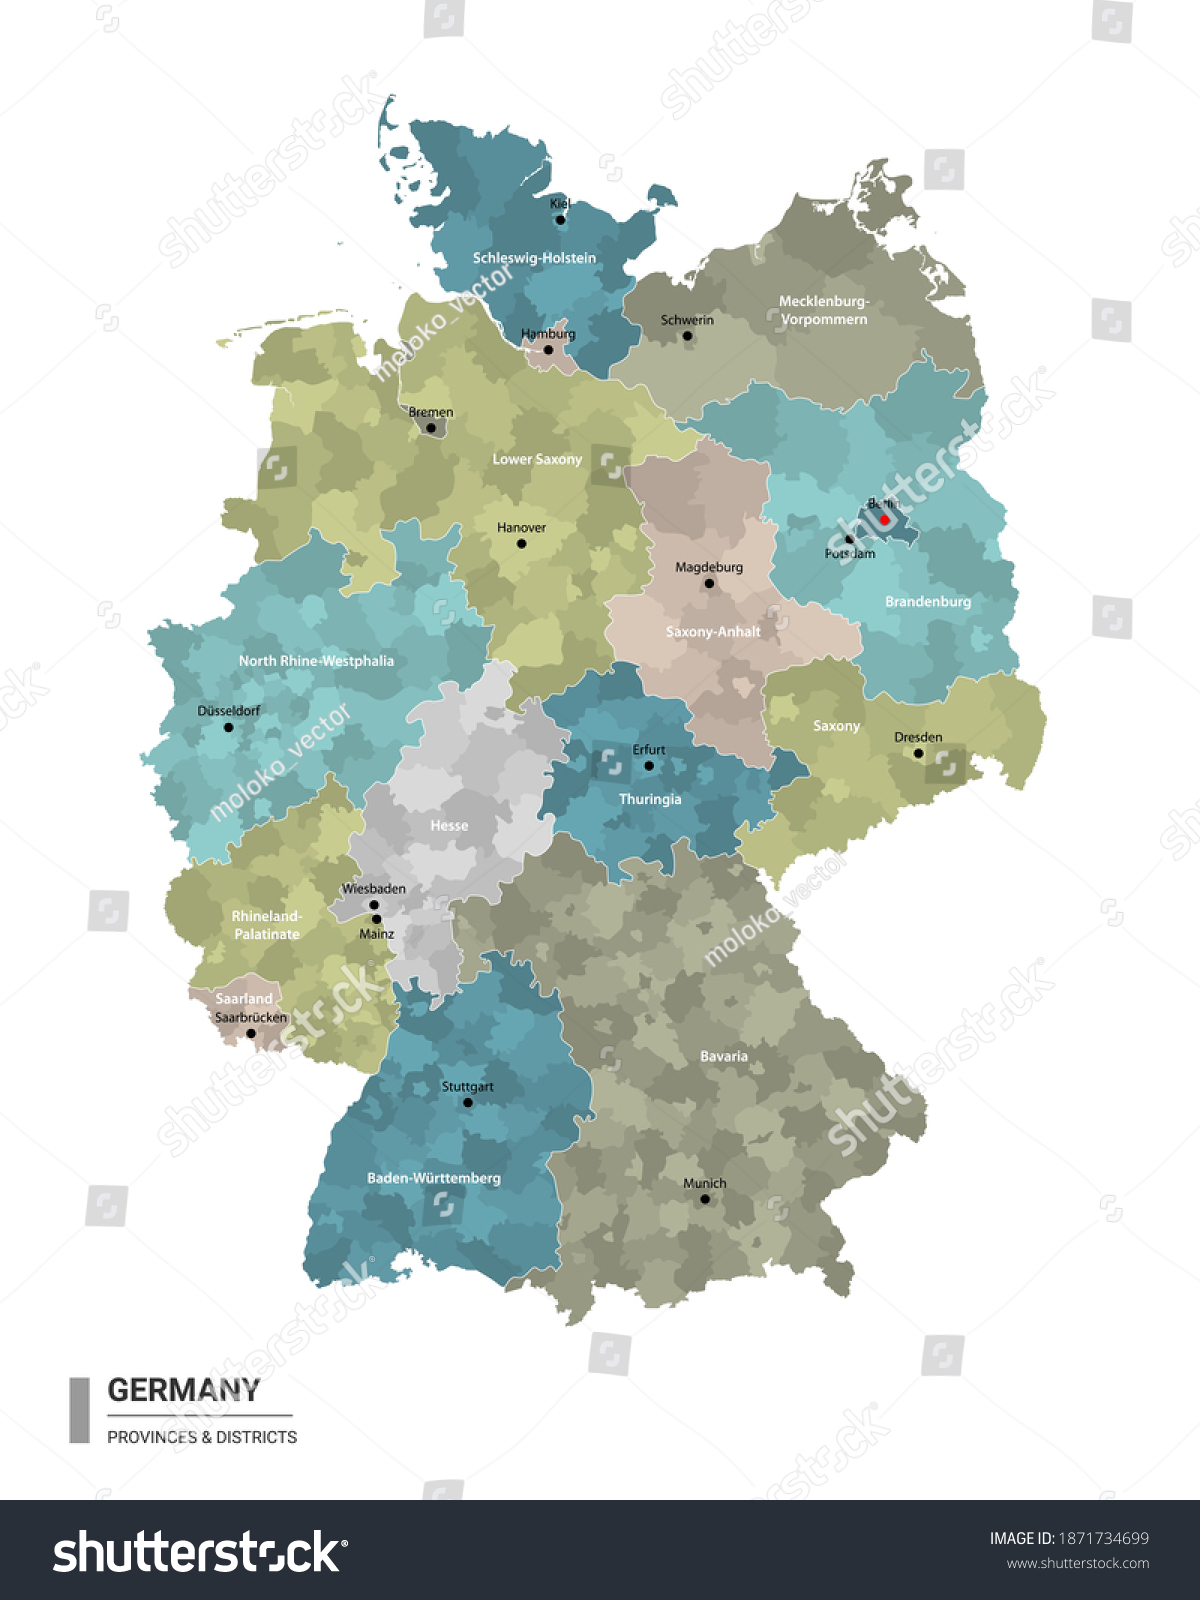 SVG of Germany higt detailed map with subdivisions. Administrative map of Germany with districts and cities name, colored by states and administrative districts. Vector illustration. svg